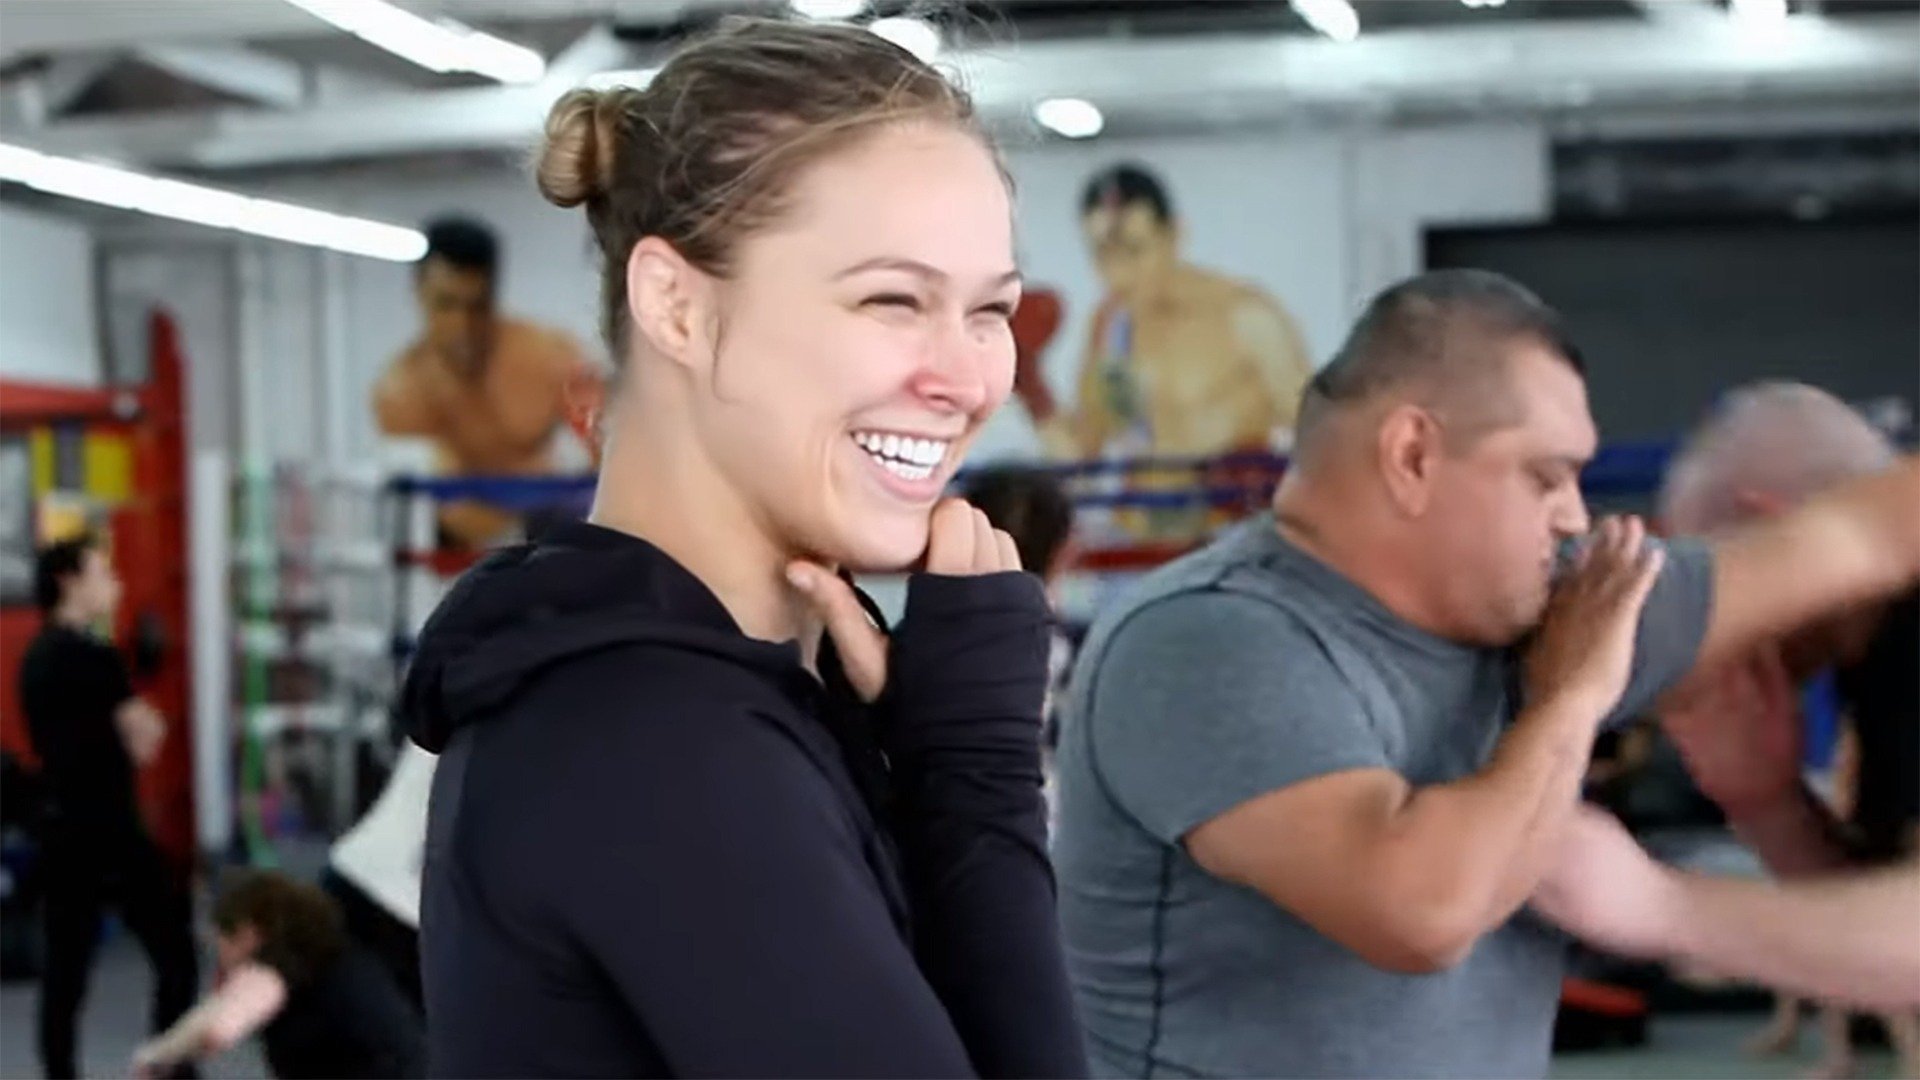 Through My Father's Eyes: The Ronda Rousey Story